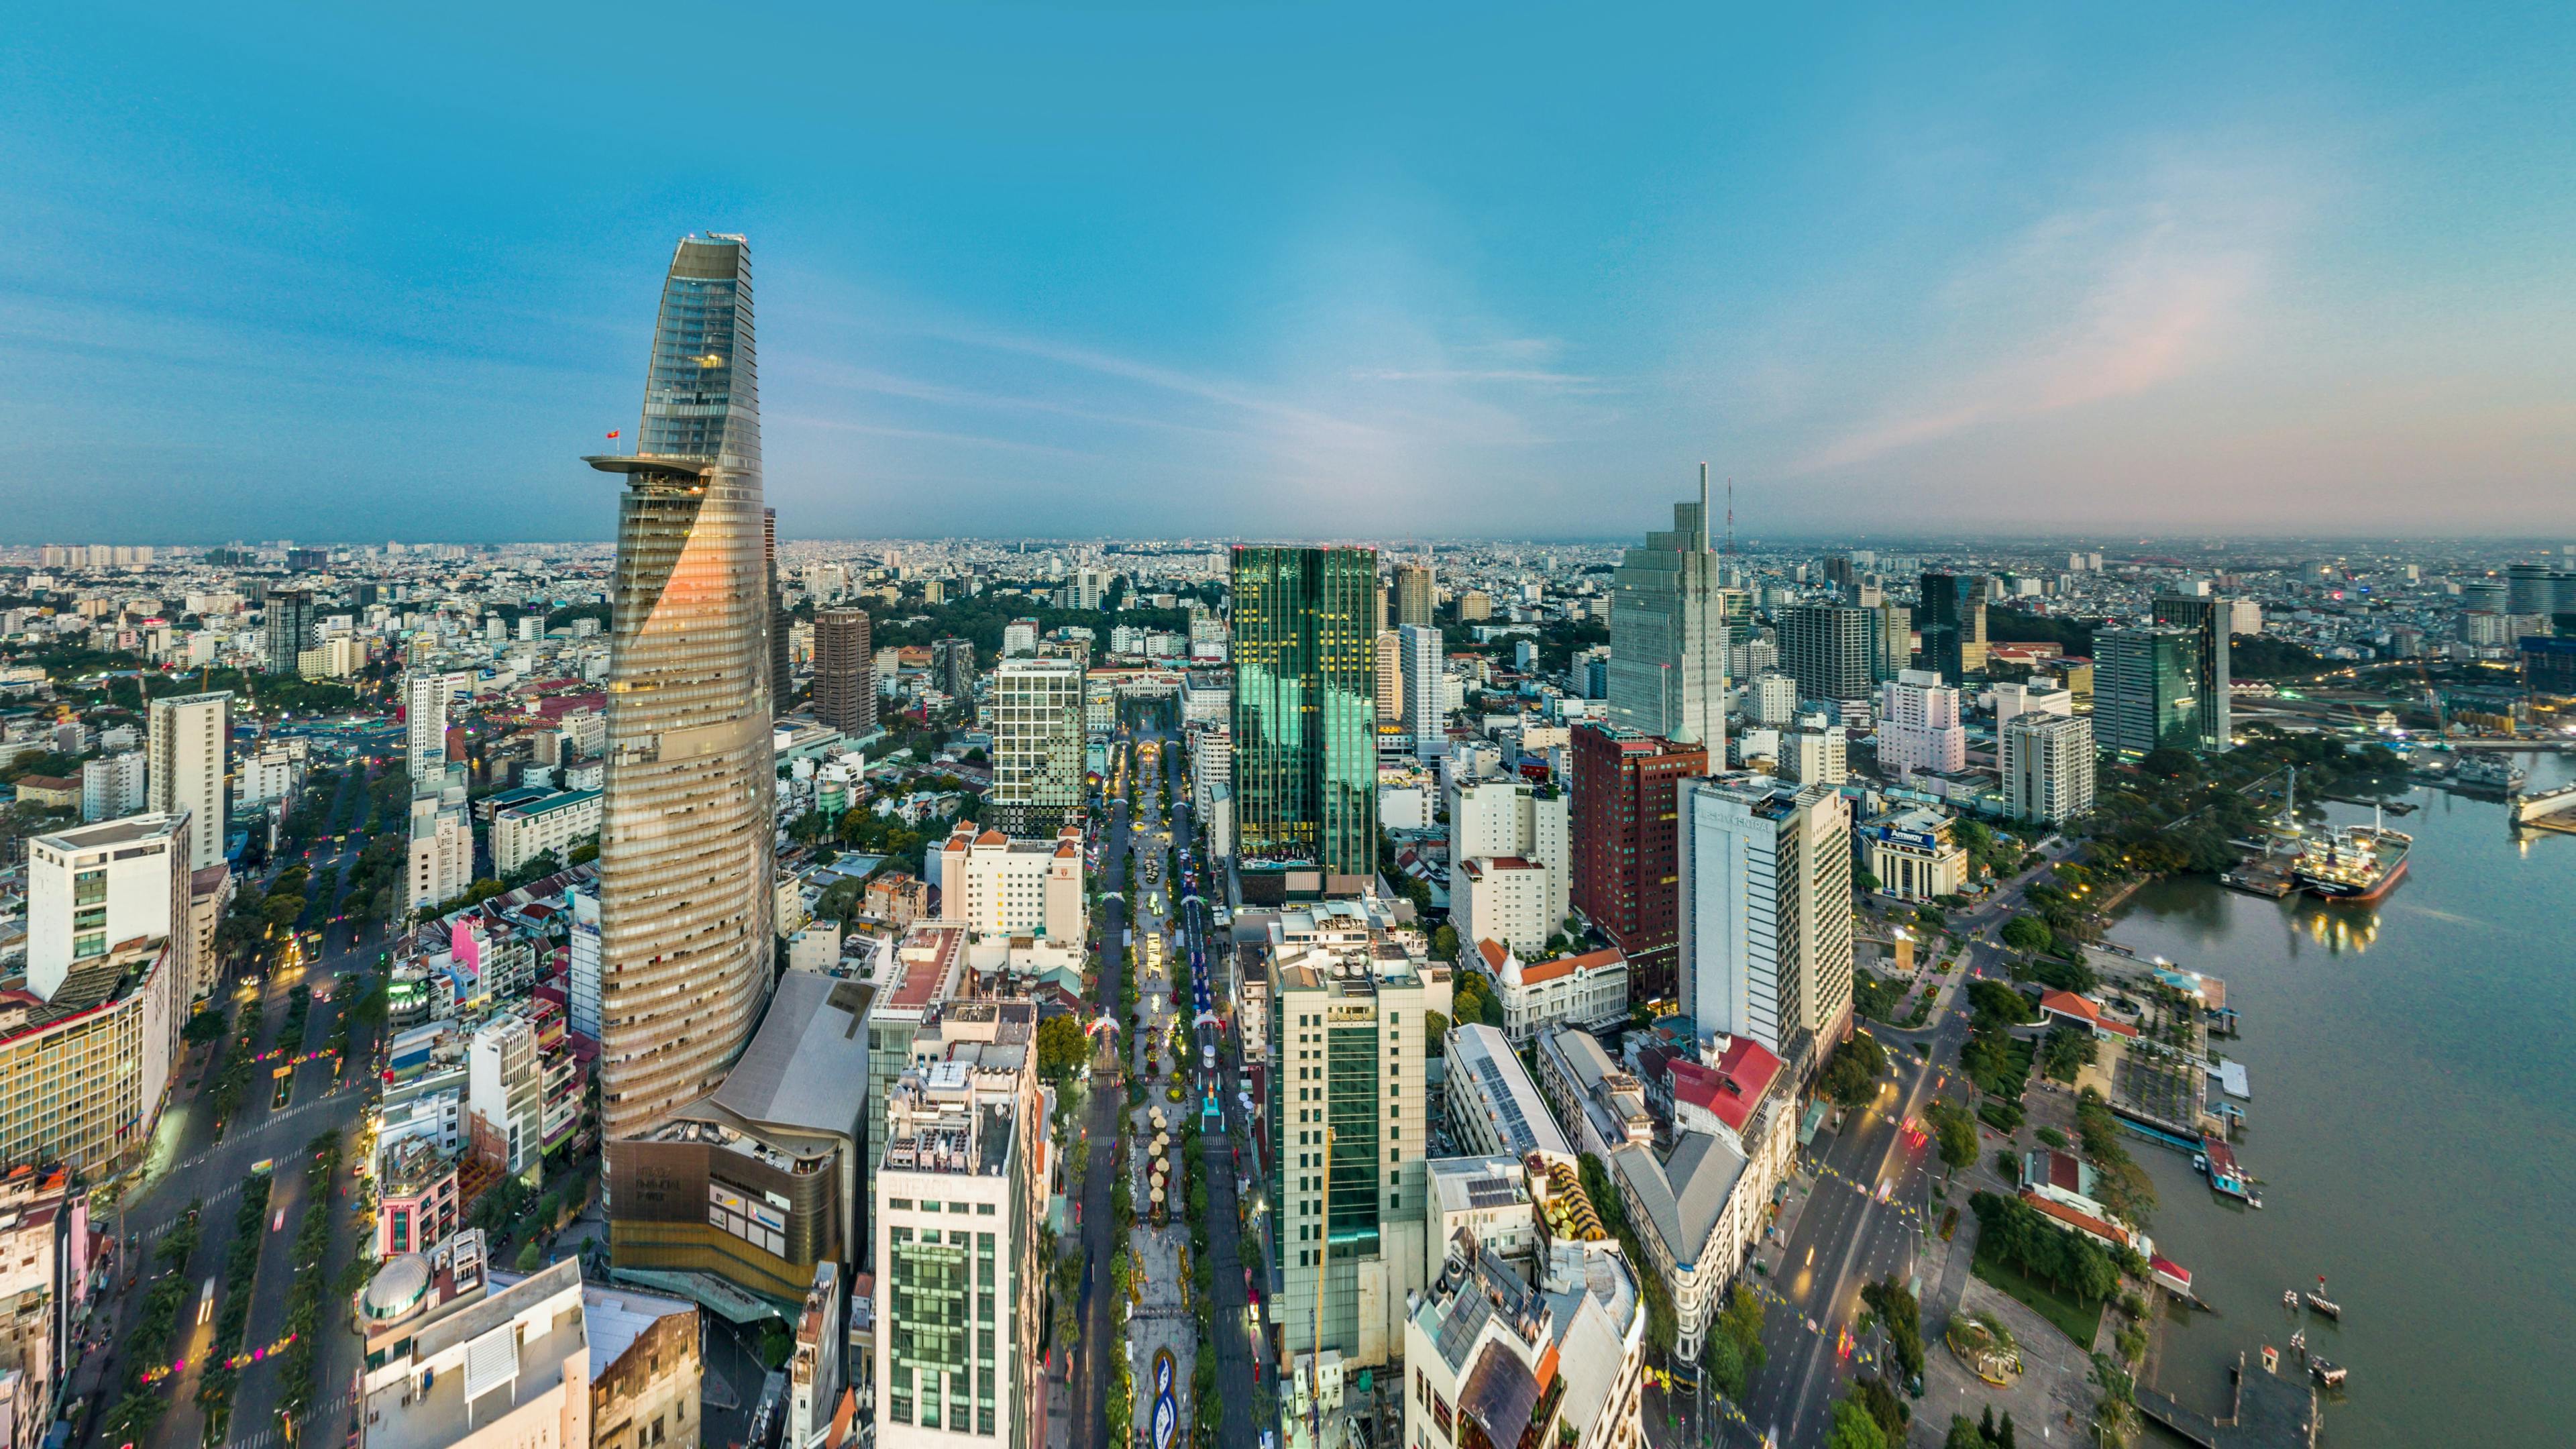 Aerial view of Ho Chi Minh City